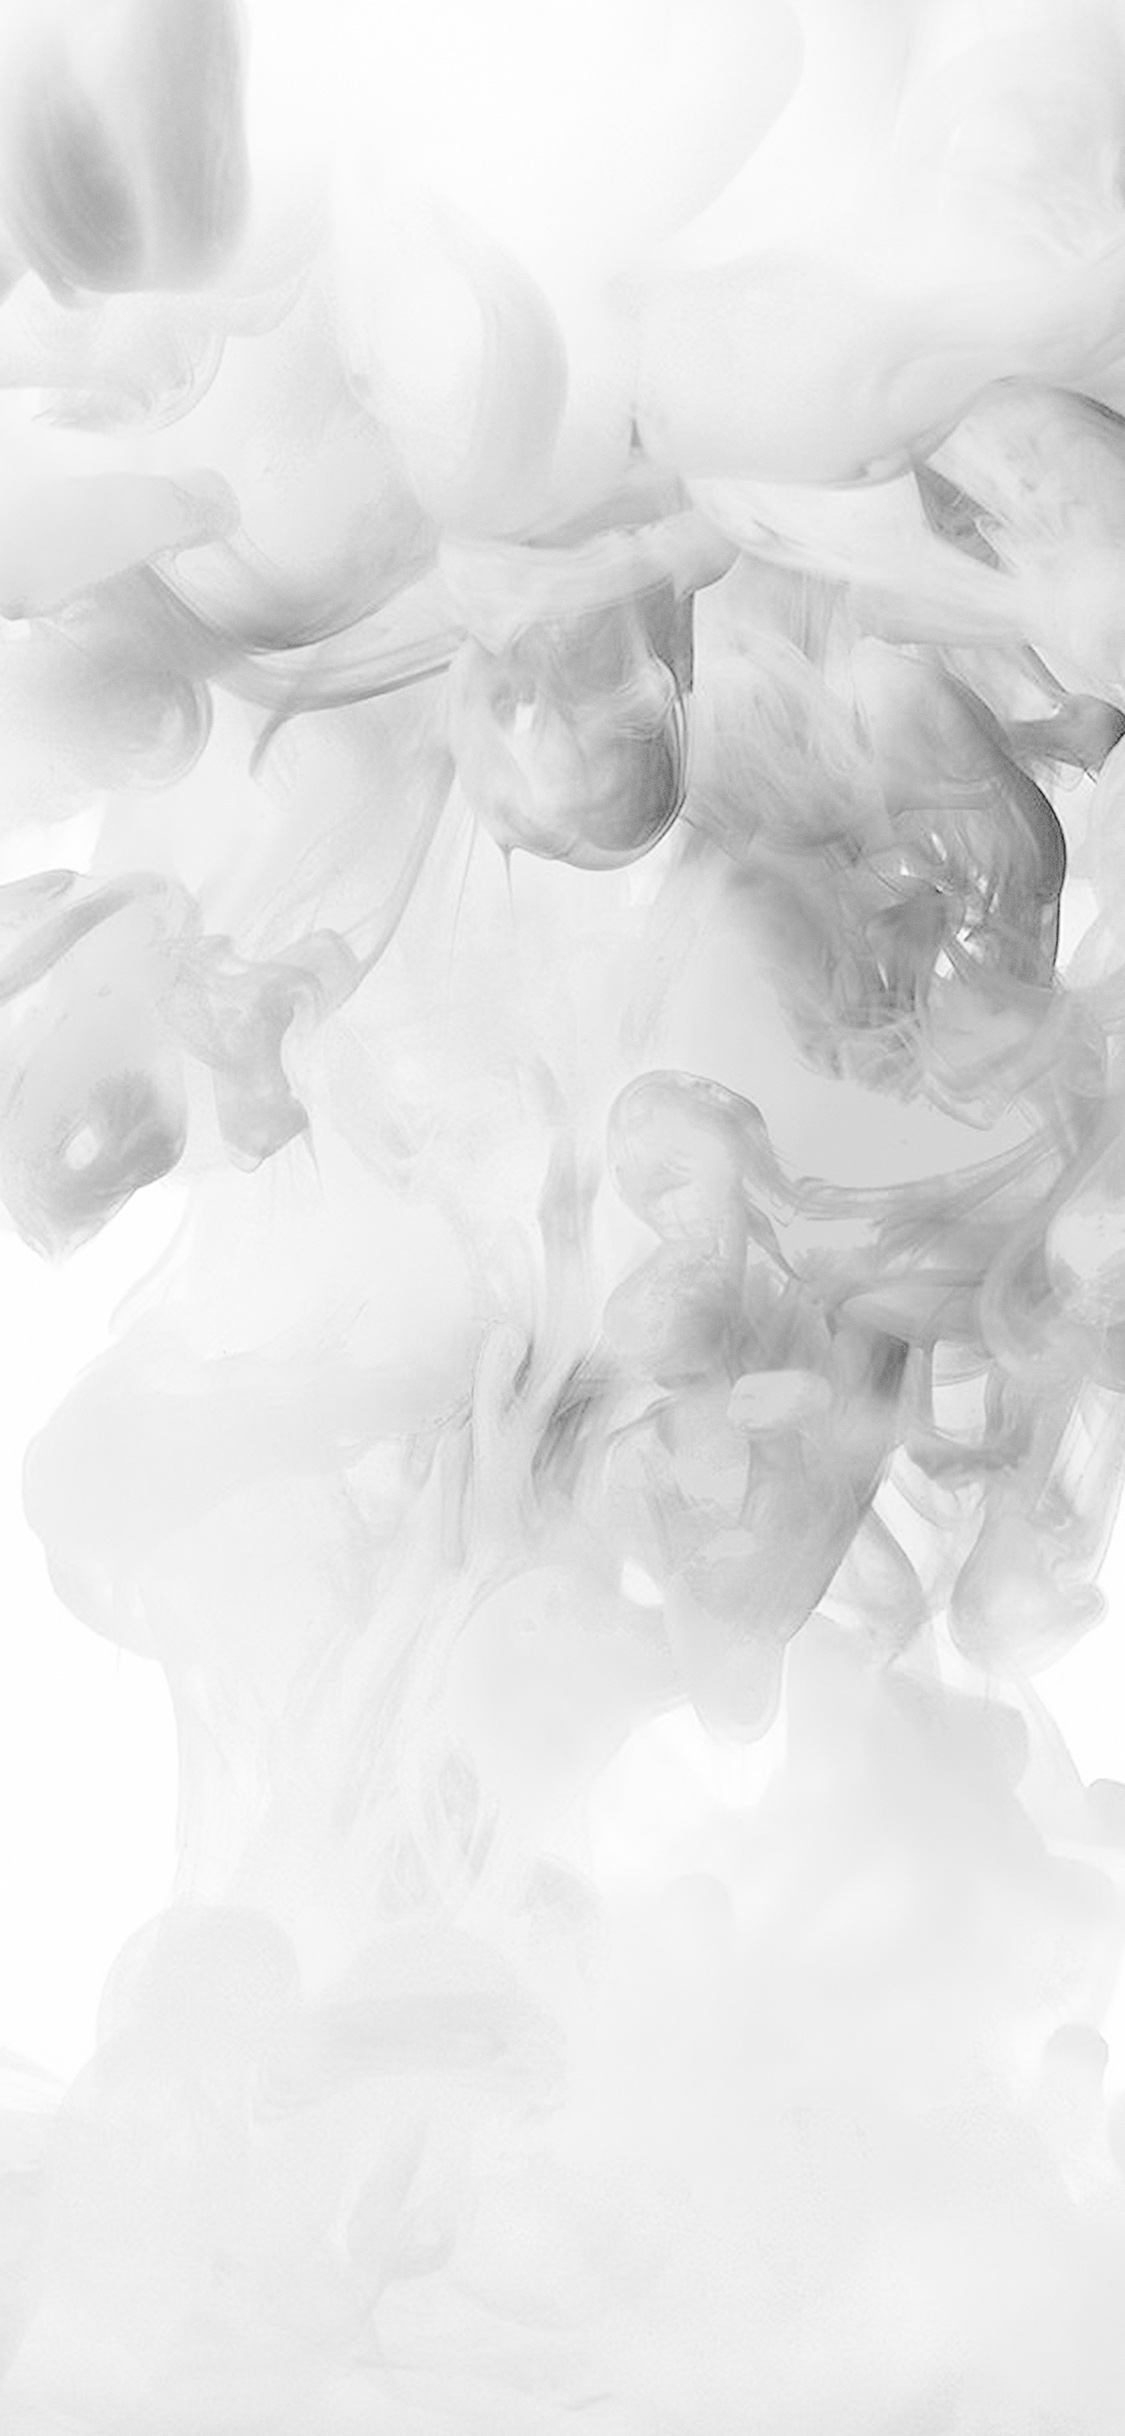 Am73 Smoke White Bw Abstract Fog Art Illust - Iphone X Background White , HD Wallpaper & Backgrounds